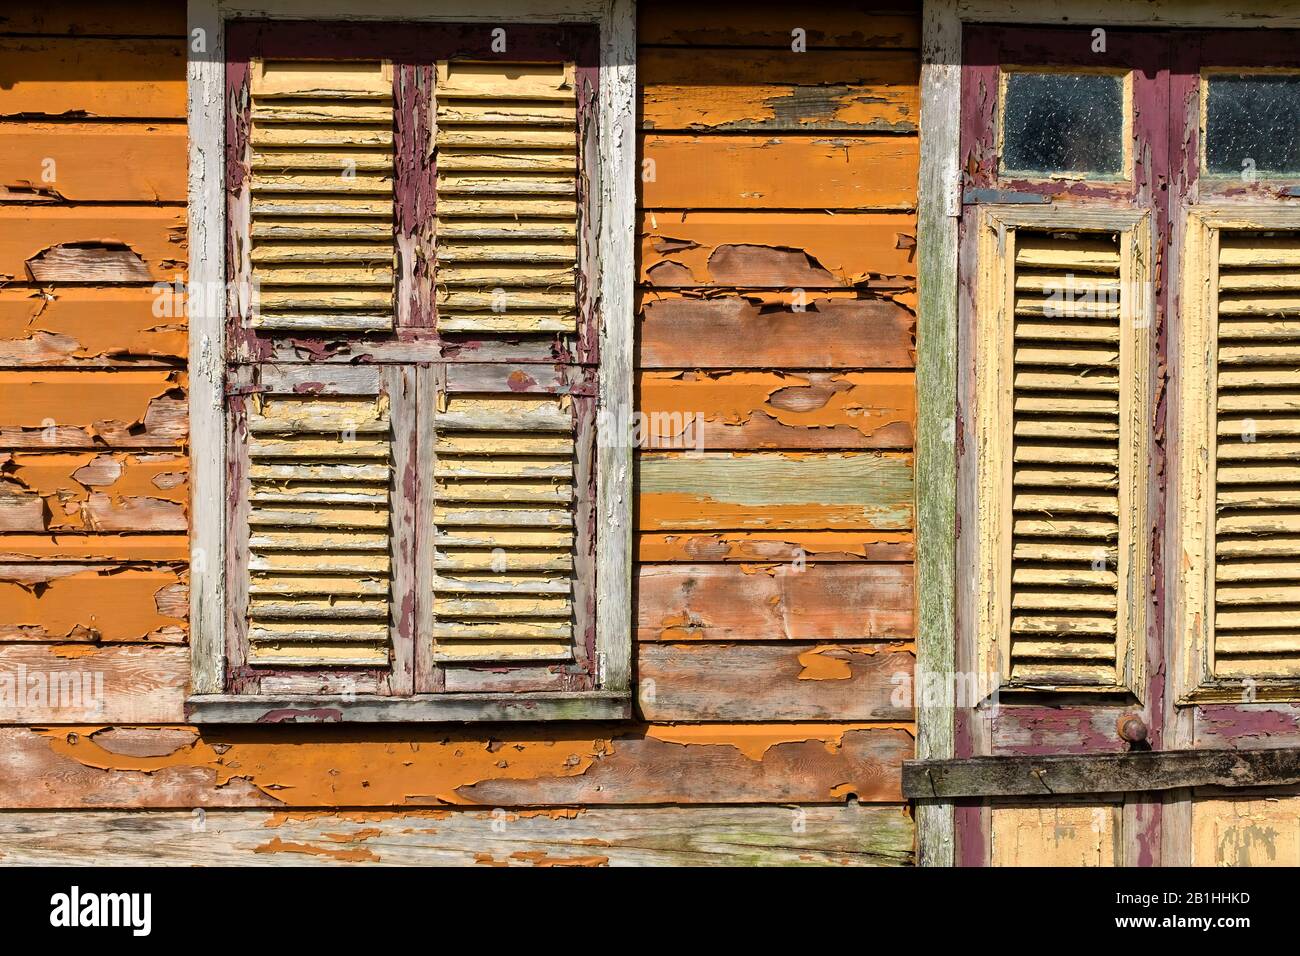 Wooden shanty houses on the Caribbean island of Barbados, peeling paint, culture, lifestyle, off the beaten track, hard lives, poor life, surviving Stock Photo